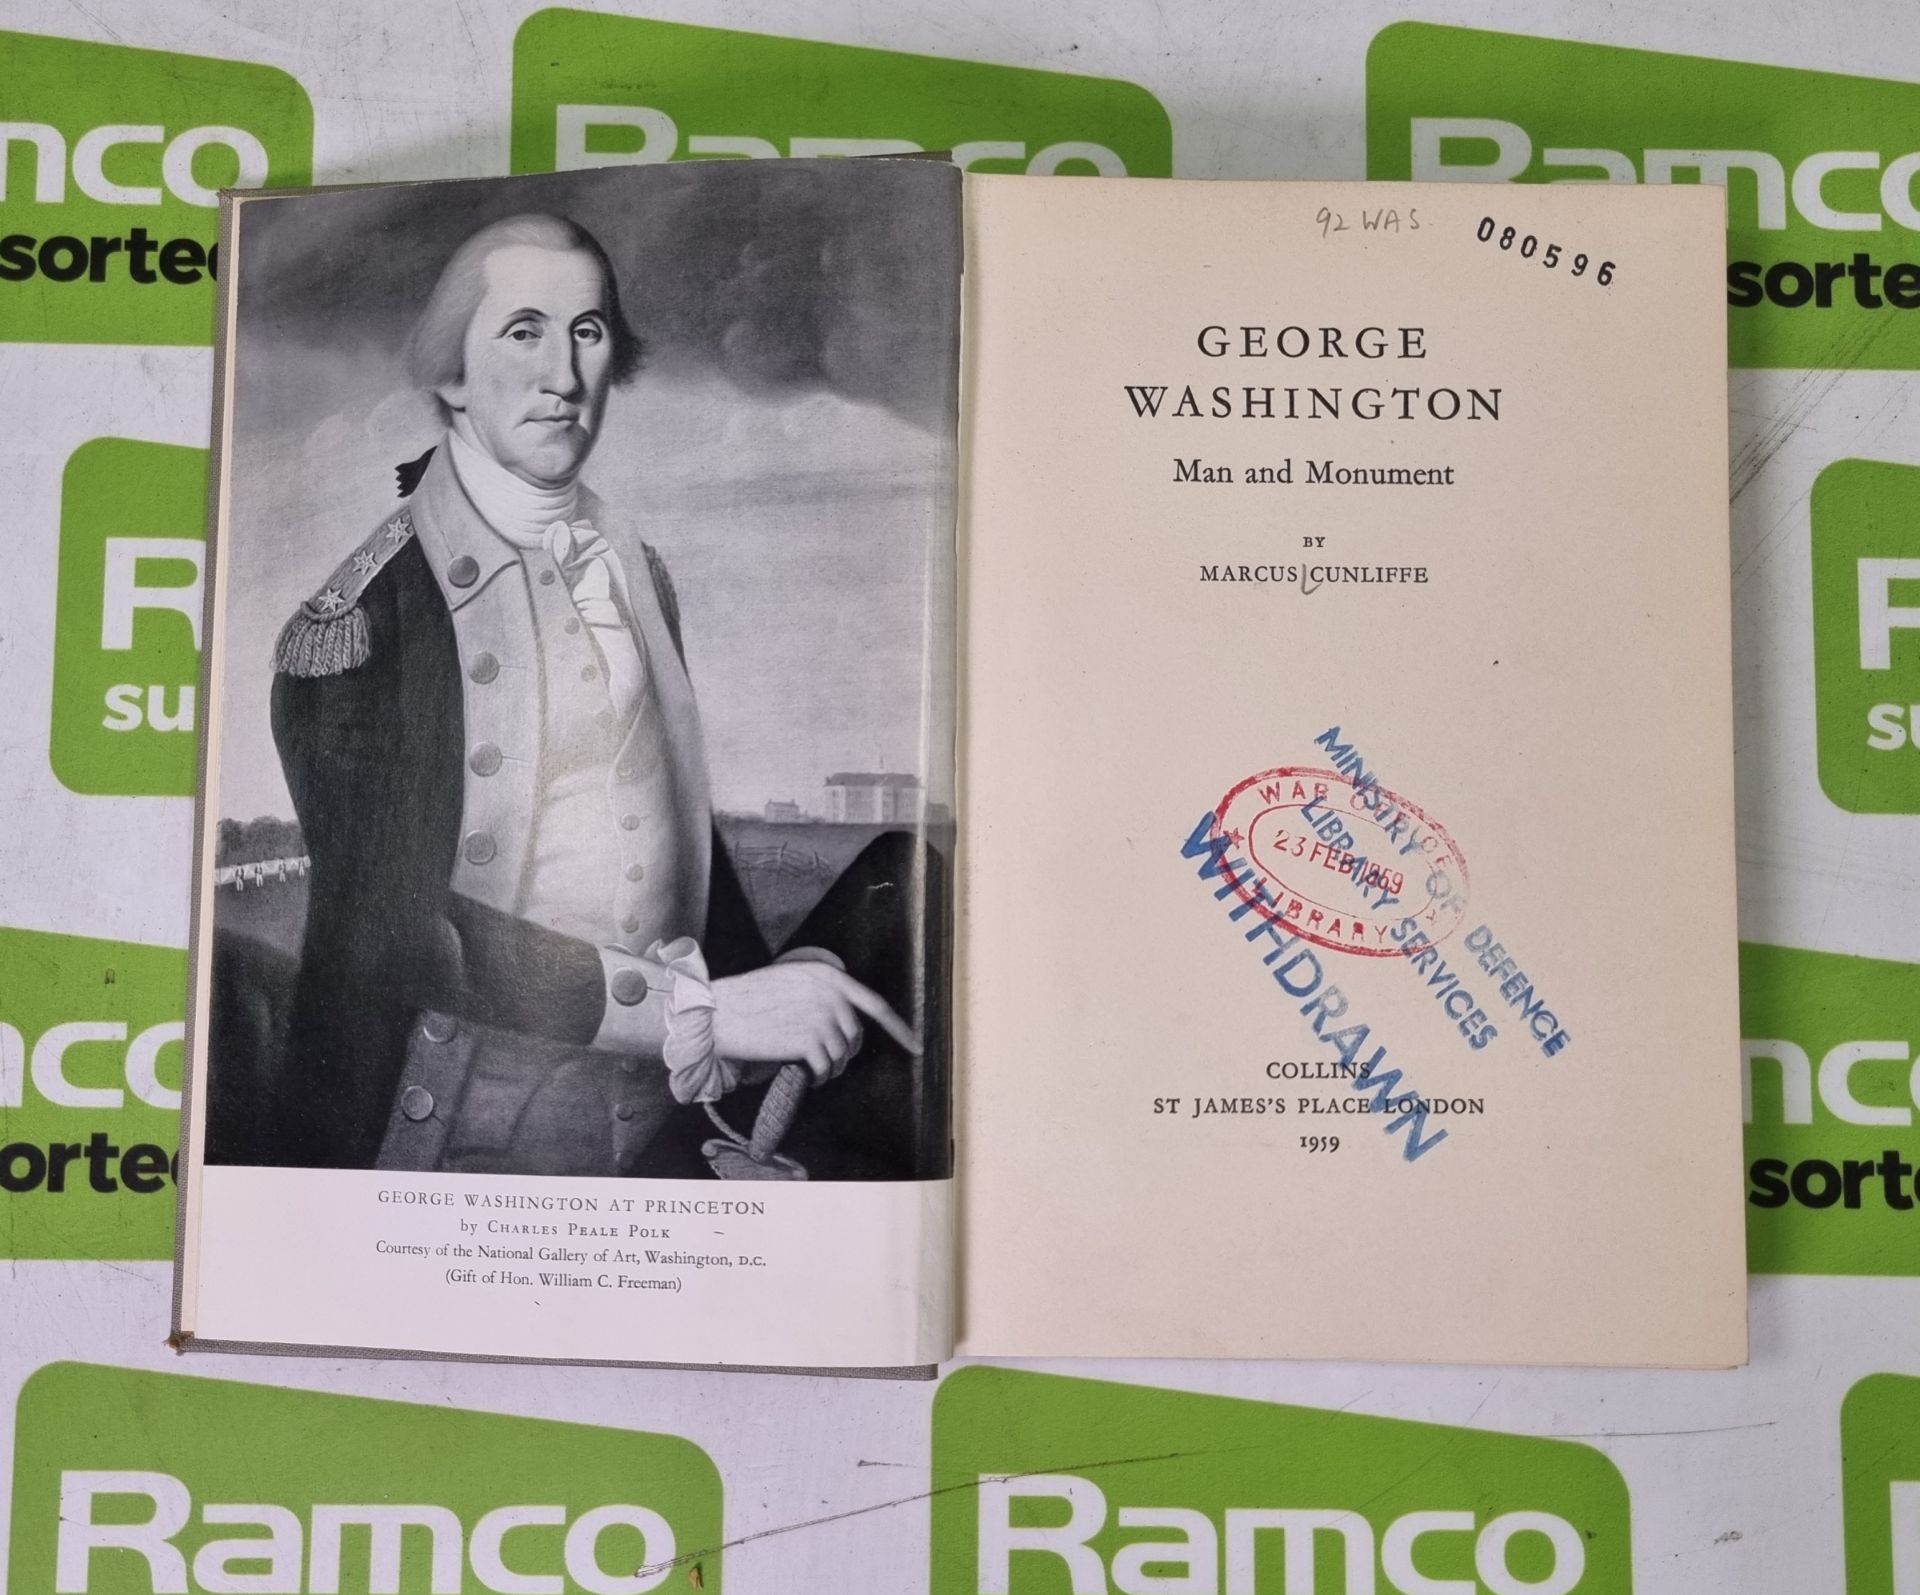 George Washington: Man and Monument by Marcus Cunliffe, Published by Collins, London, in 1959 - hard - Image 15 of 17